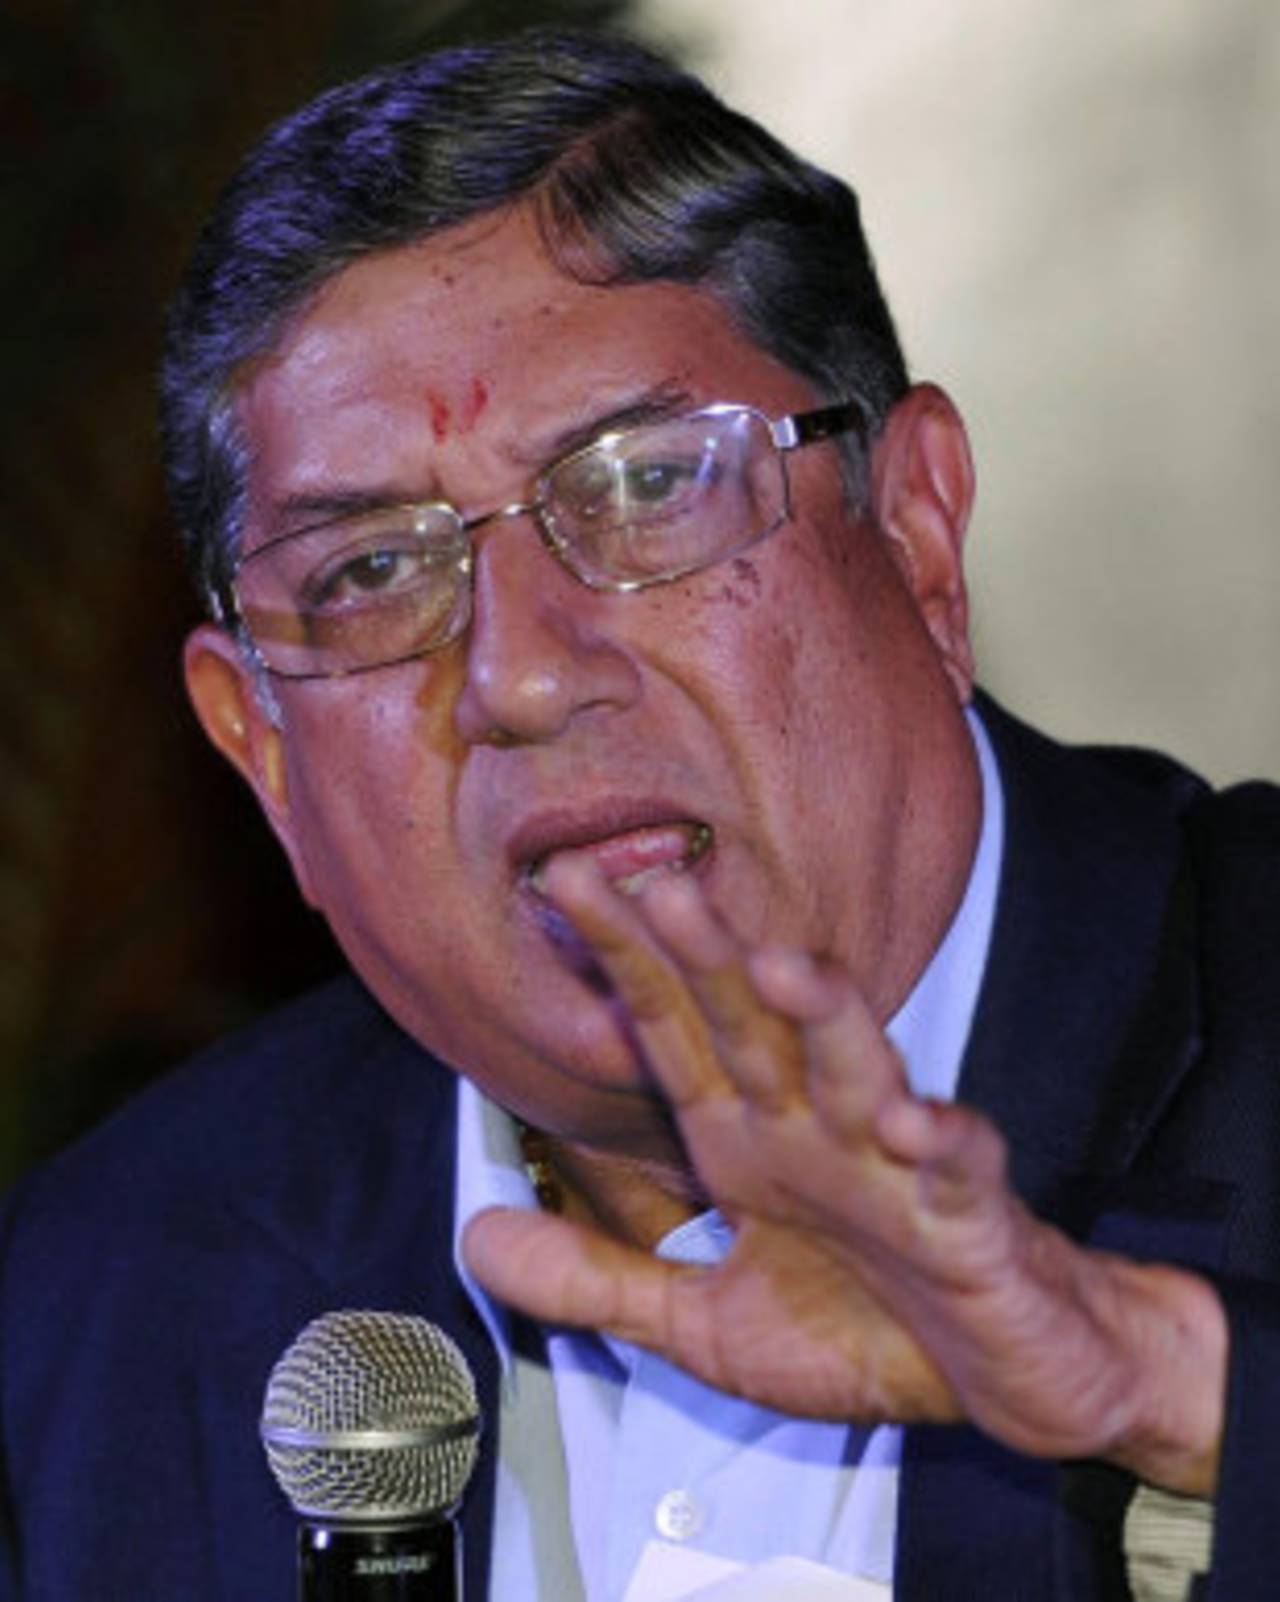 The court order did point to a "degree of probability" of N Srinivasan having had a hand in the appointment of the inquiry committee&nbsp;&nbsp;&bull;&nbsp;&nbsp;Hindustan Times